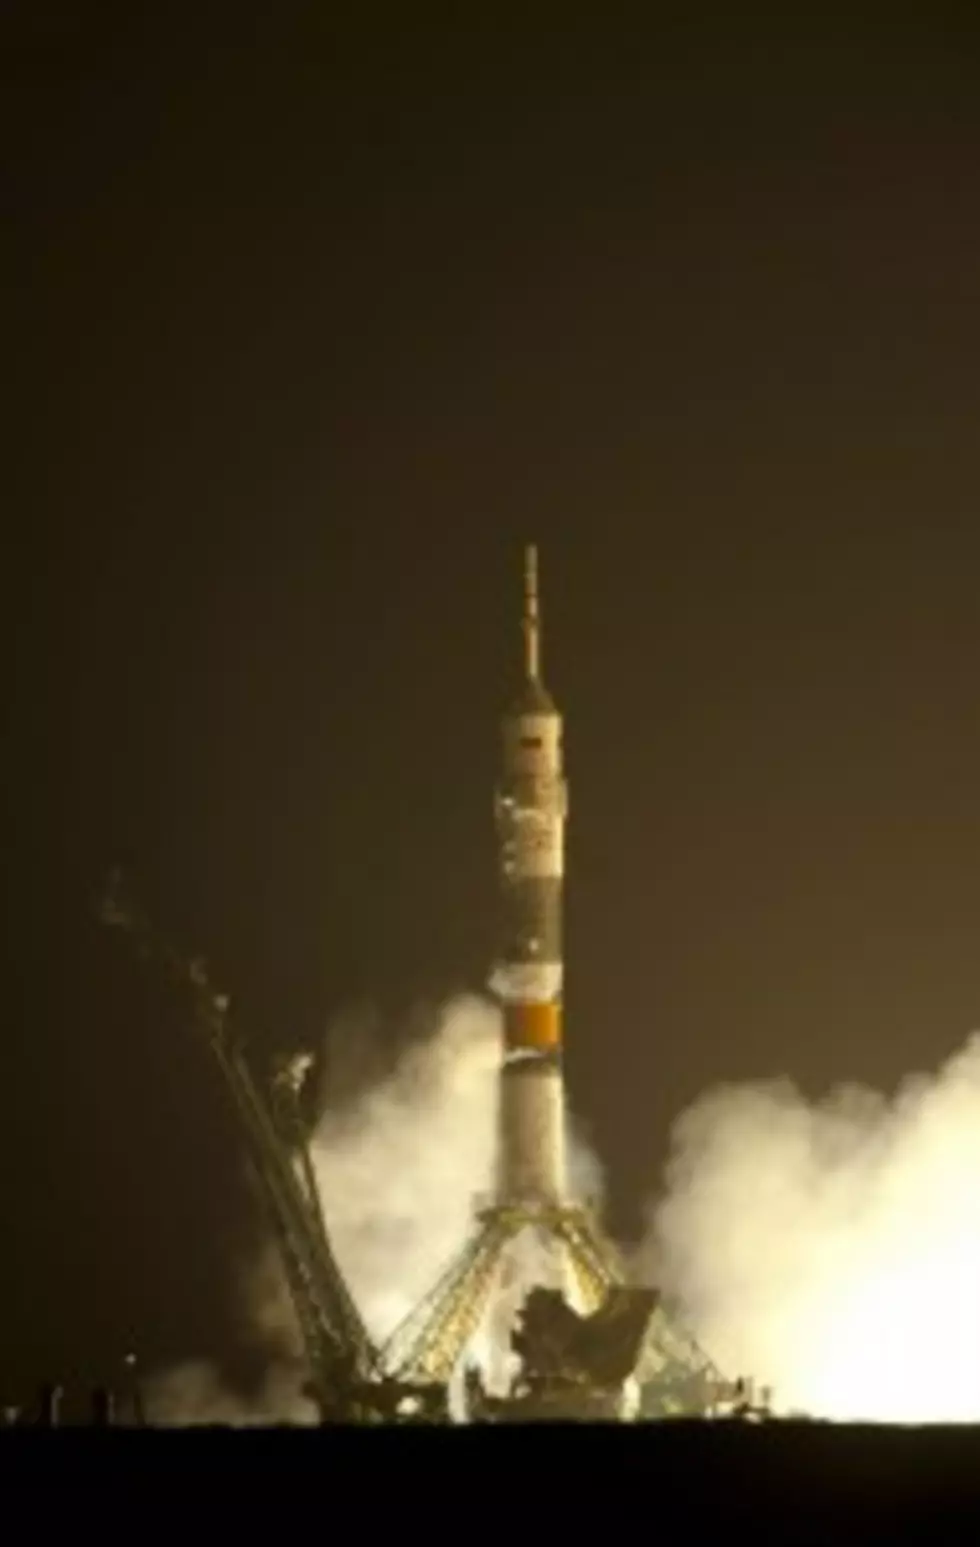 U.S.-Russia Crew Blasts Off For Space Station